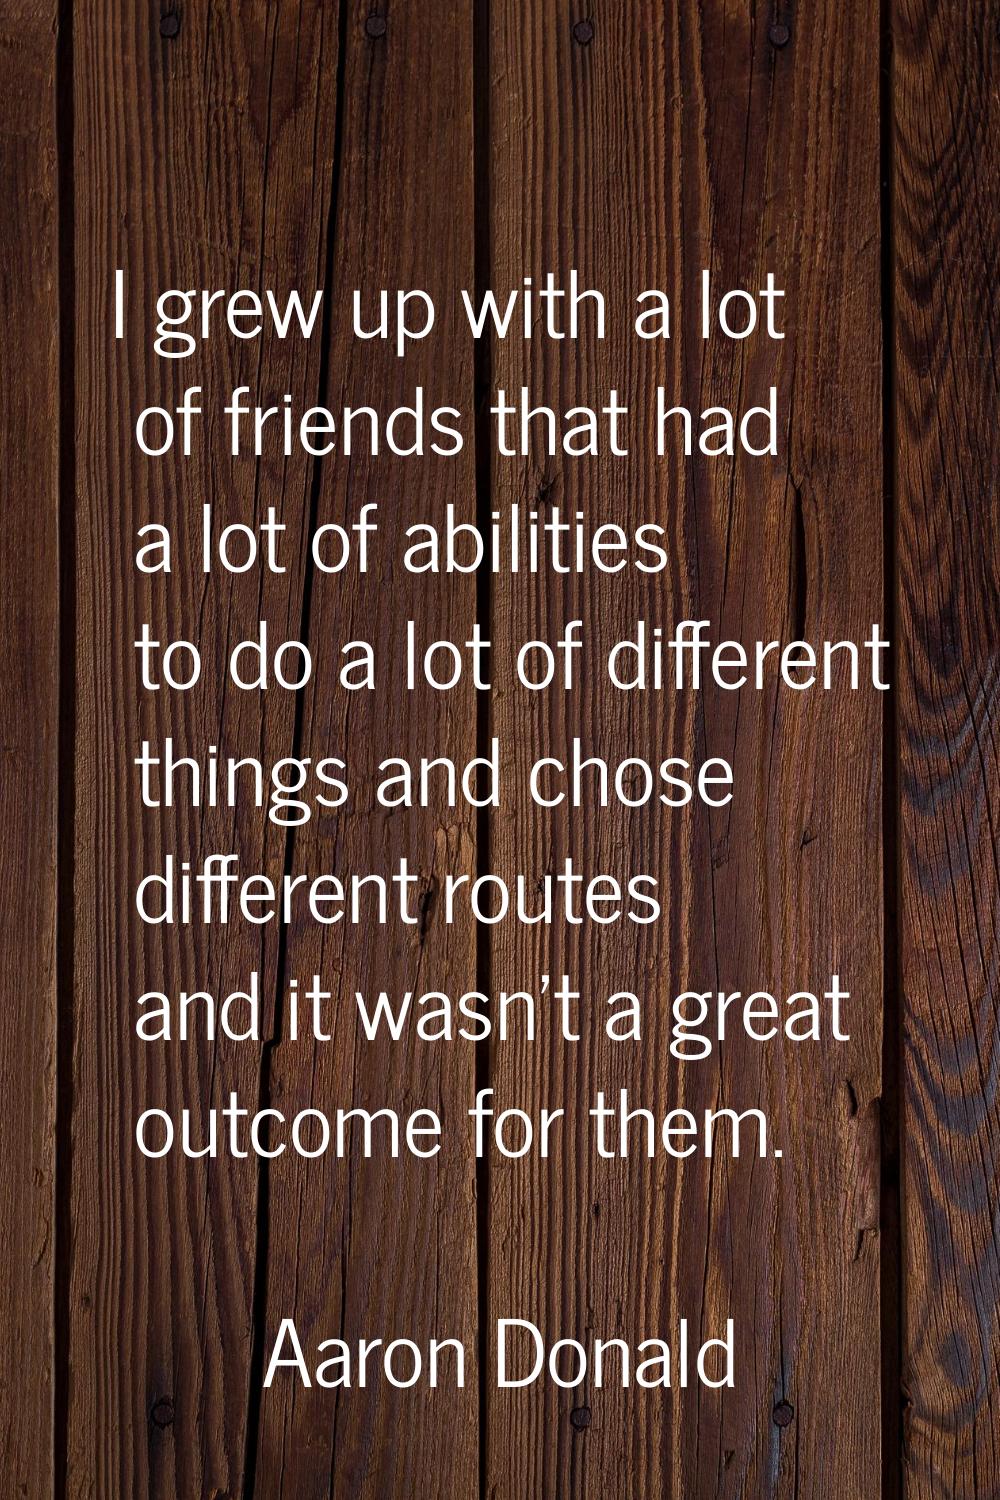 I grew up with a lot of friends that had a lot of abilities to do a lot of different things and cho